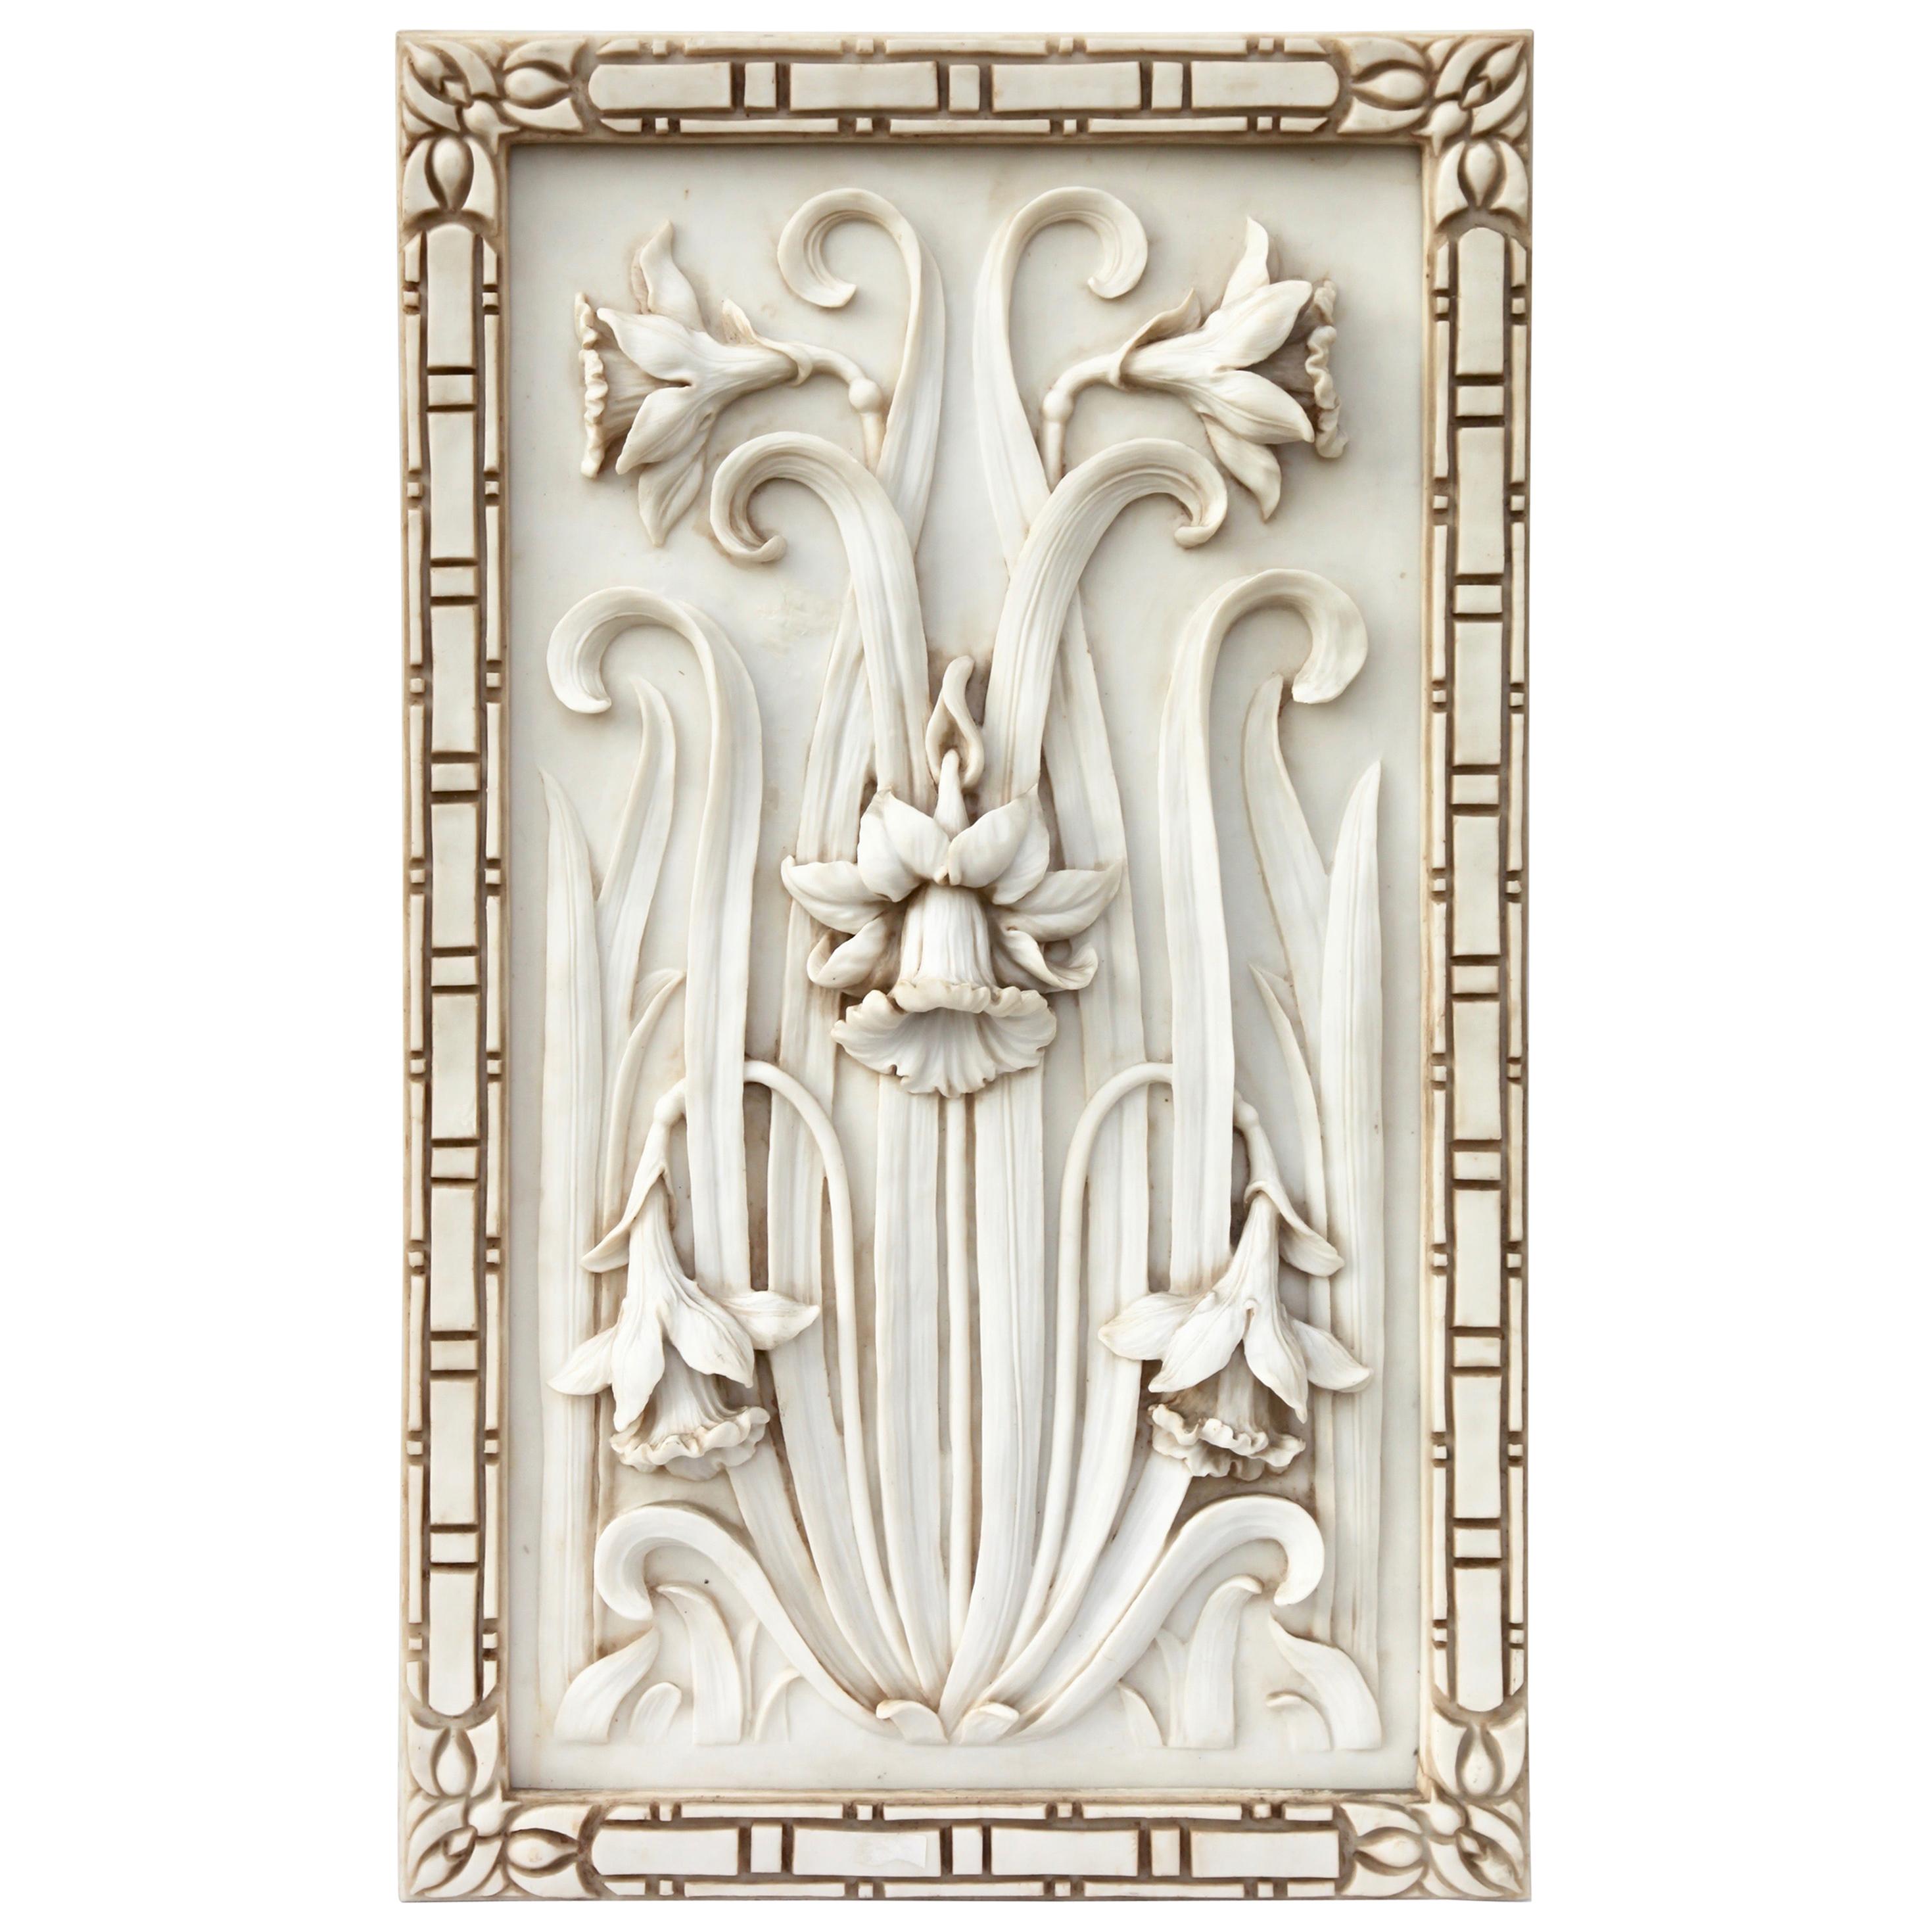 Art Nouveau 3-D Alabaster Sculptural Panel with Foliage and Daffodils / Jonquils